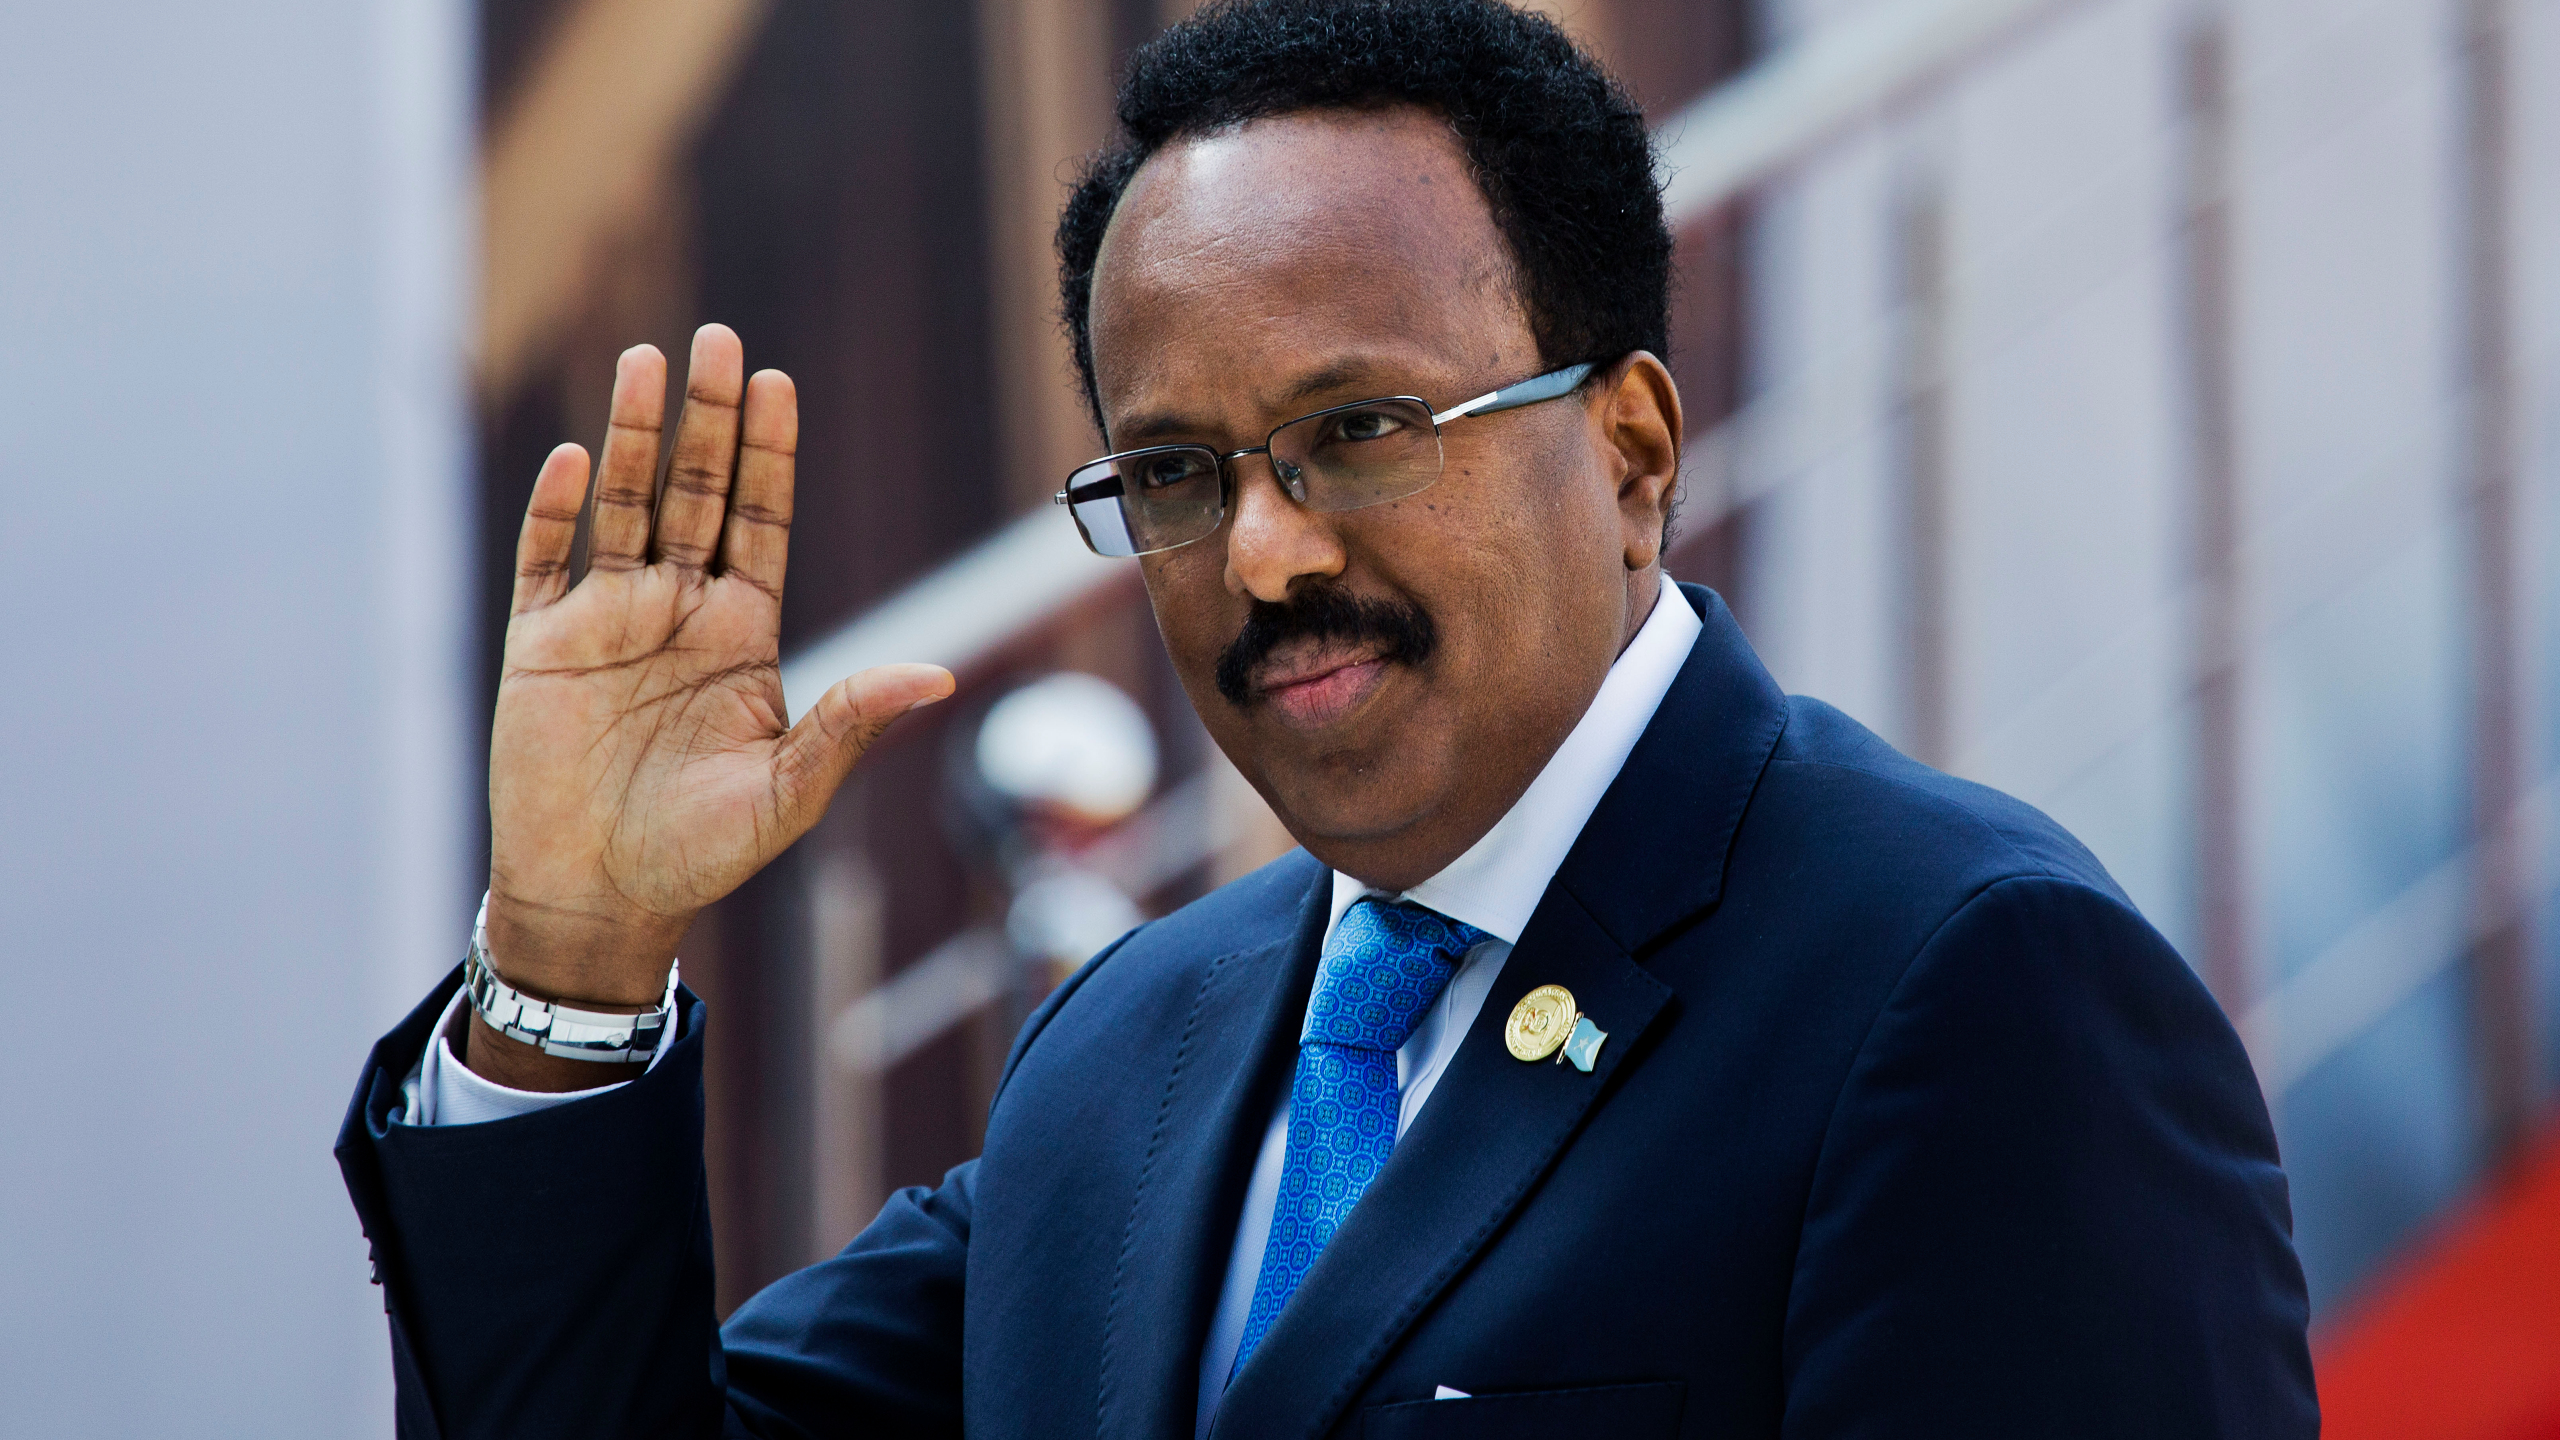 Somalia's president signs law extending his mandate for two years - state news agency